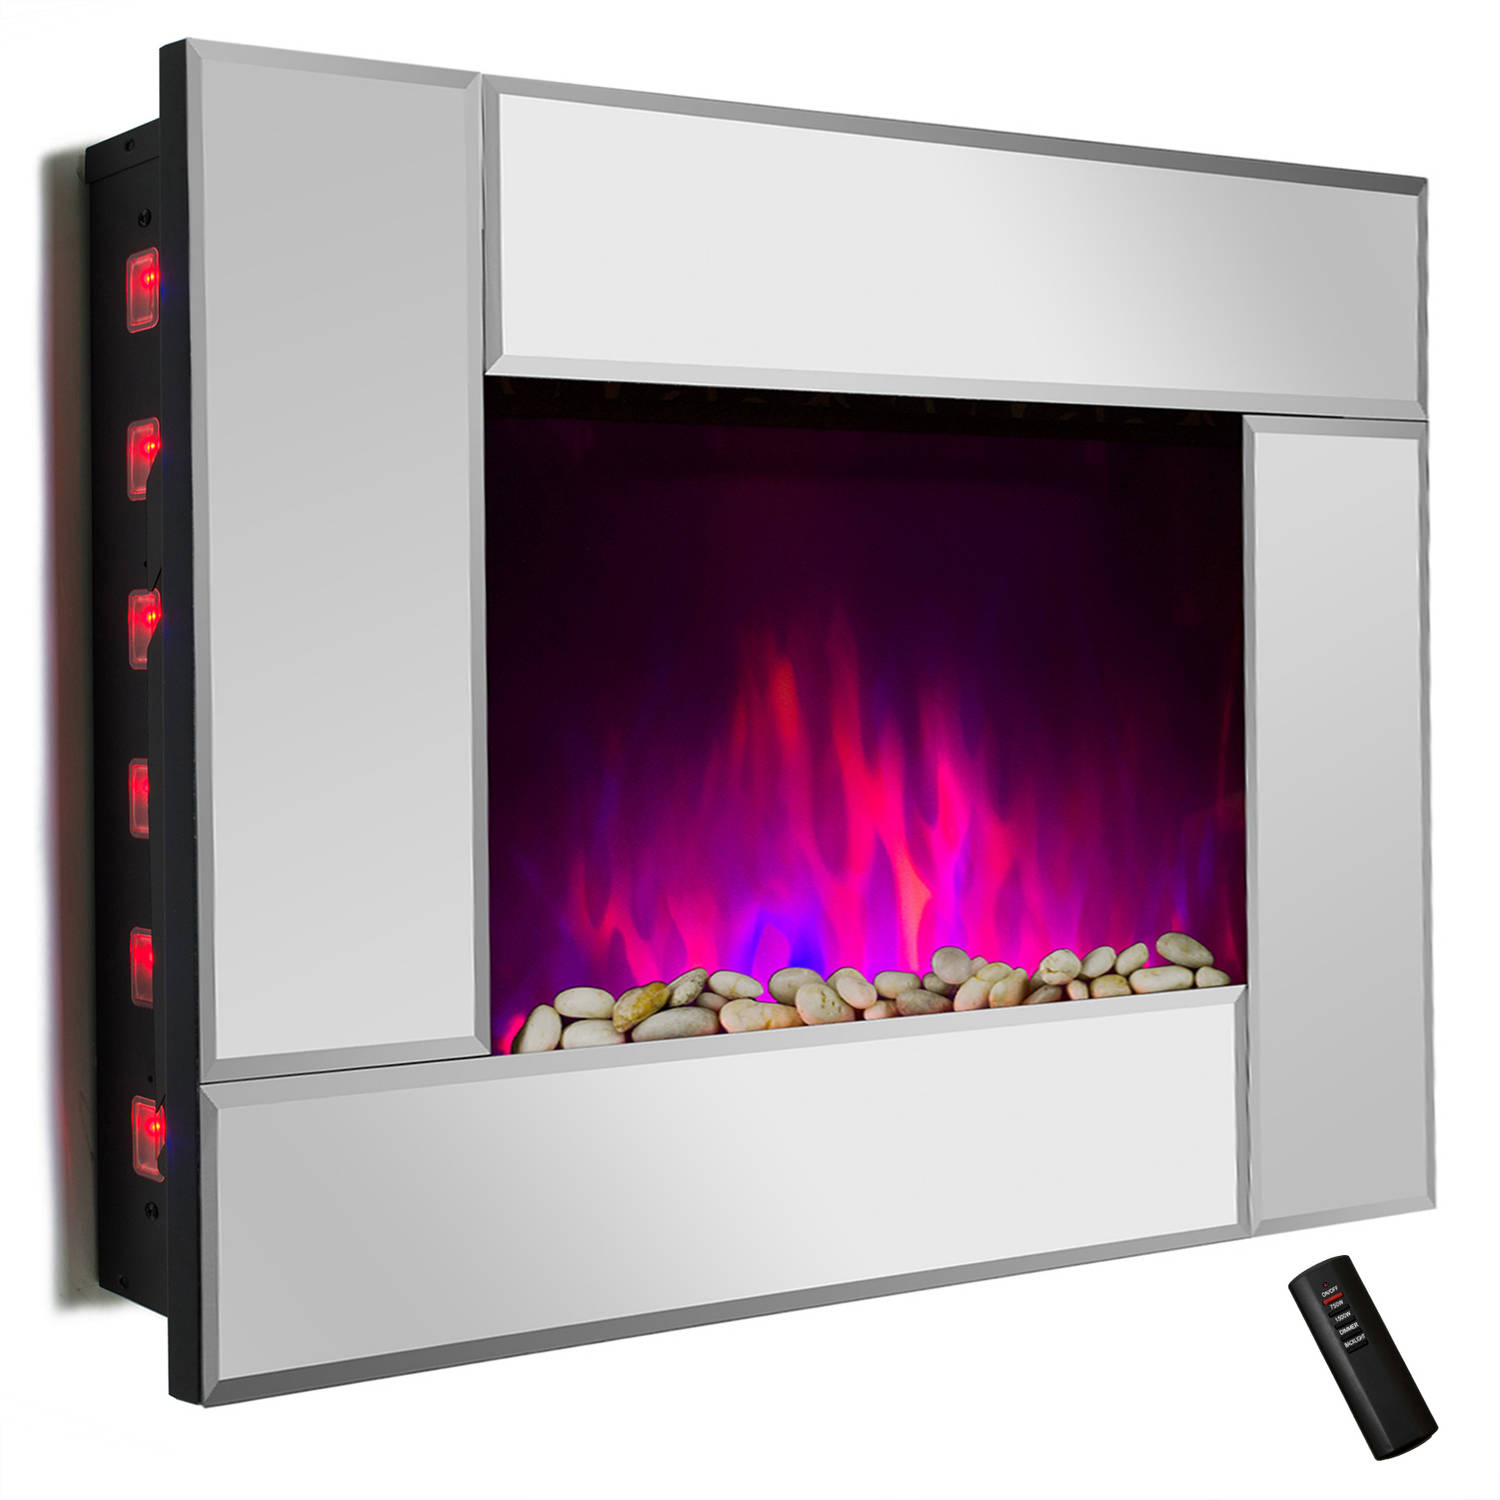 AKDY FP0050 36" 1500W Wall Mount Electric Fireplace Heater with Tempered Glass, Pebbles, Logs and Remote Control, Mirror - image 3 of 14